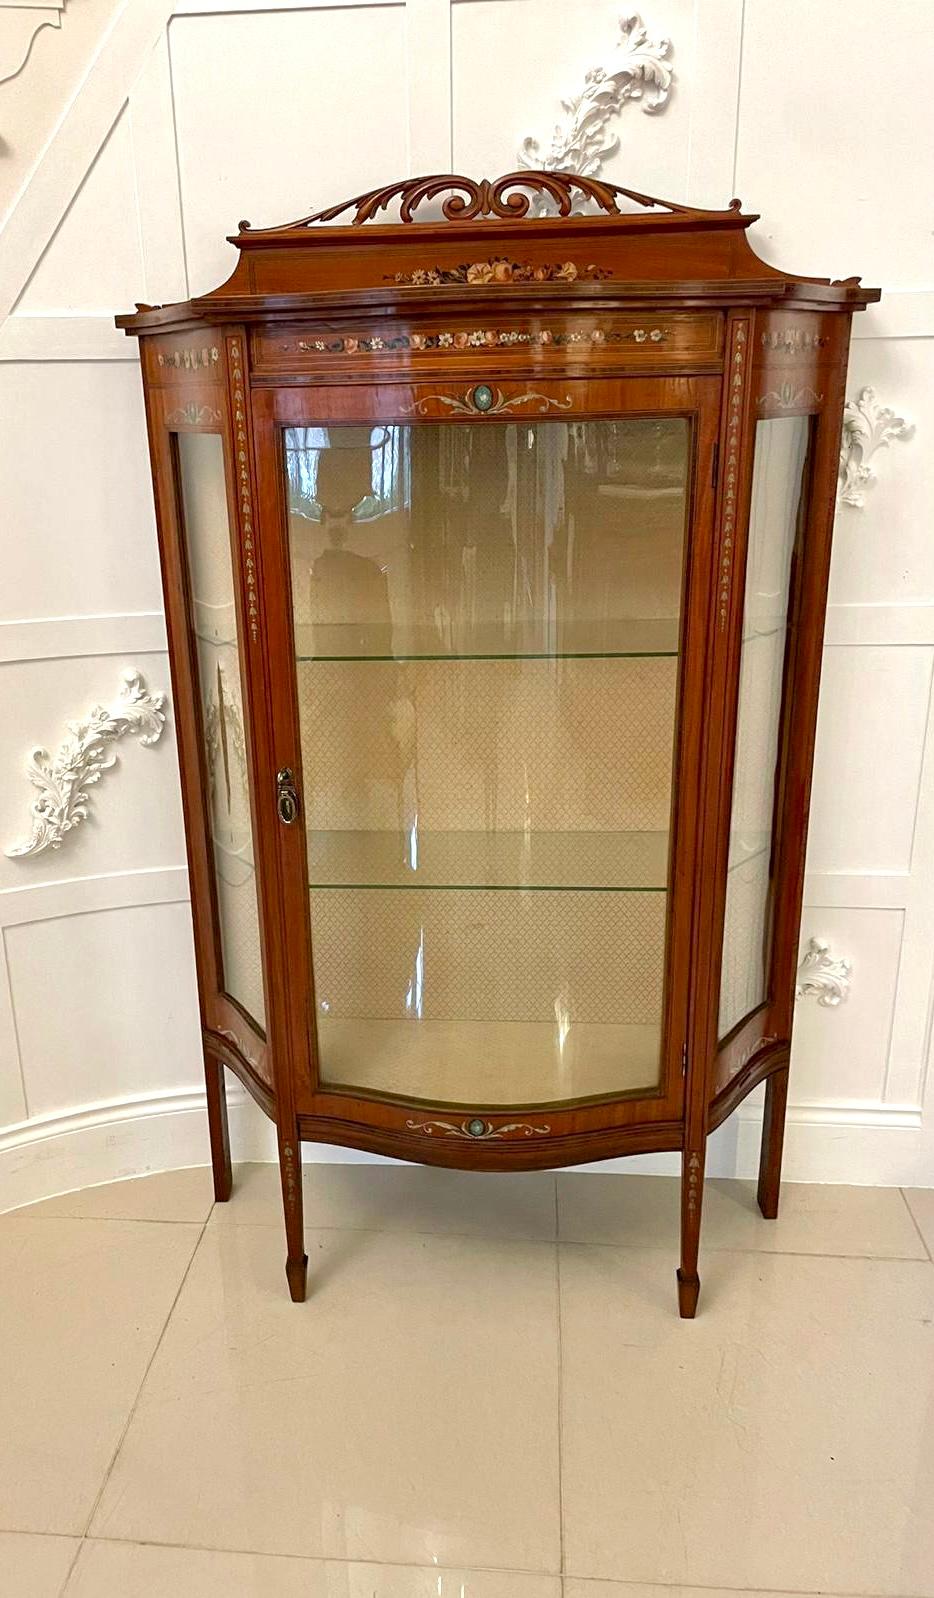 Fine quality antique Victorian satinwood display cabinet with original beautiful painted decoration having a fine quality antique Victorian serpentine shaped satinwood display cabinet with a hand painted and carved gallery top above a serpentine